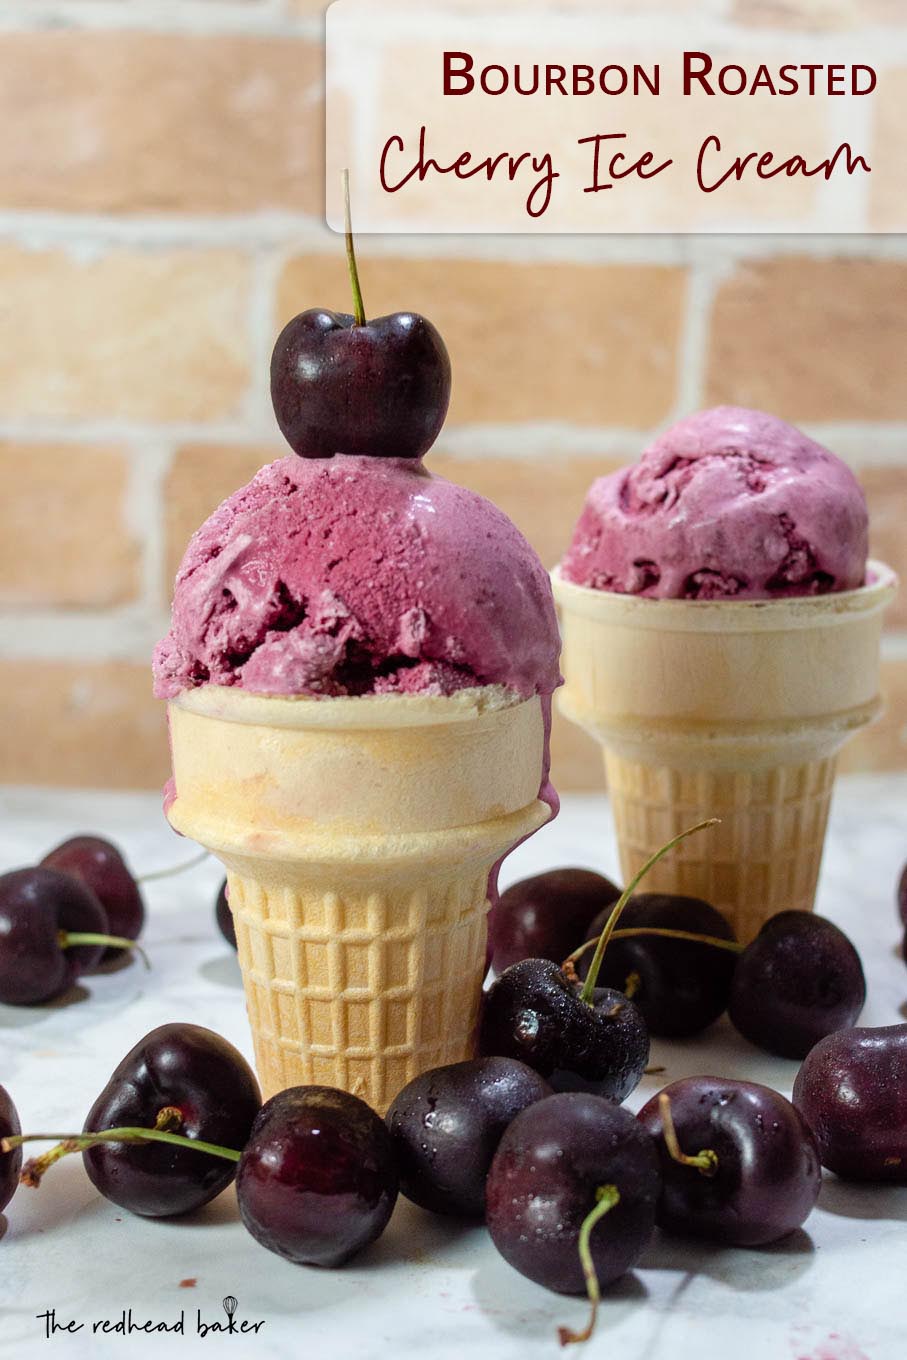 Two bourbon roasted cherry ice cream cones surrounded by fresh cherries